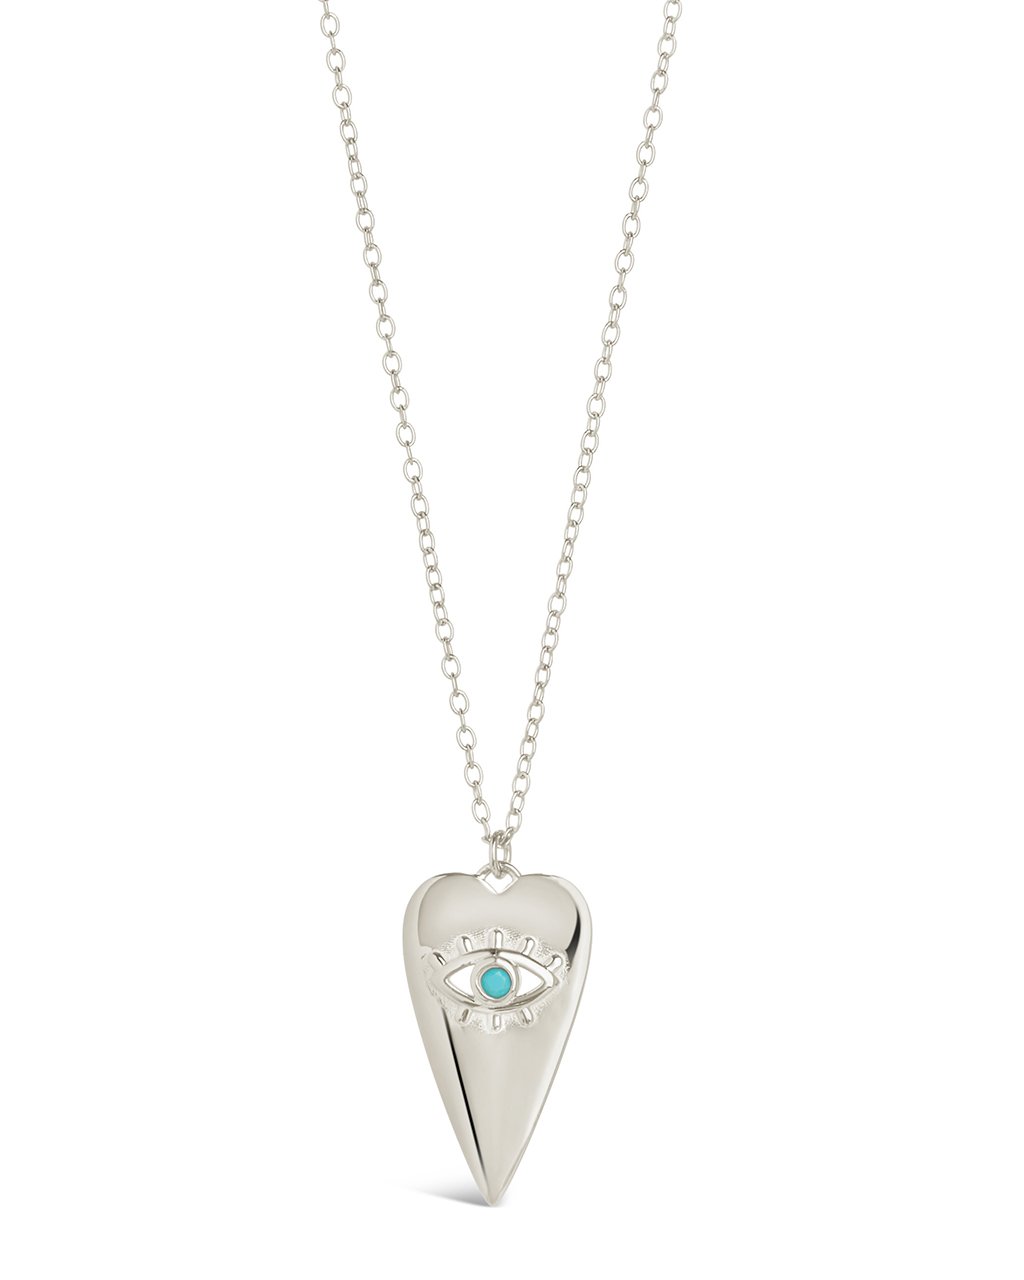 Heart Pendant with Turquoise Evil Eye Pendant Necklace Sterling Forever Silver 